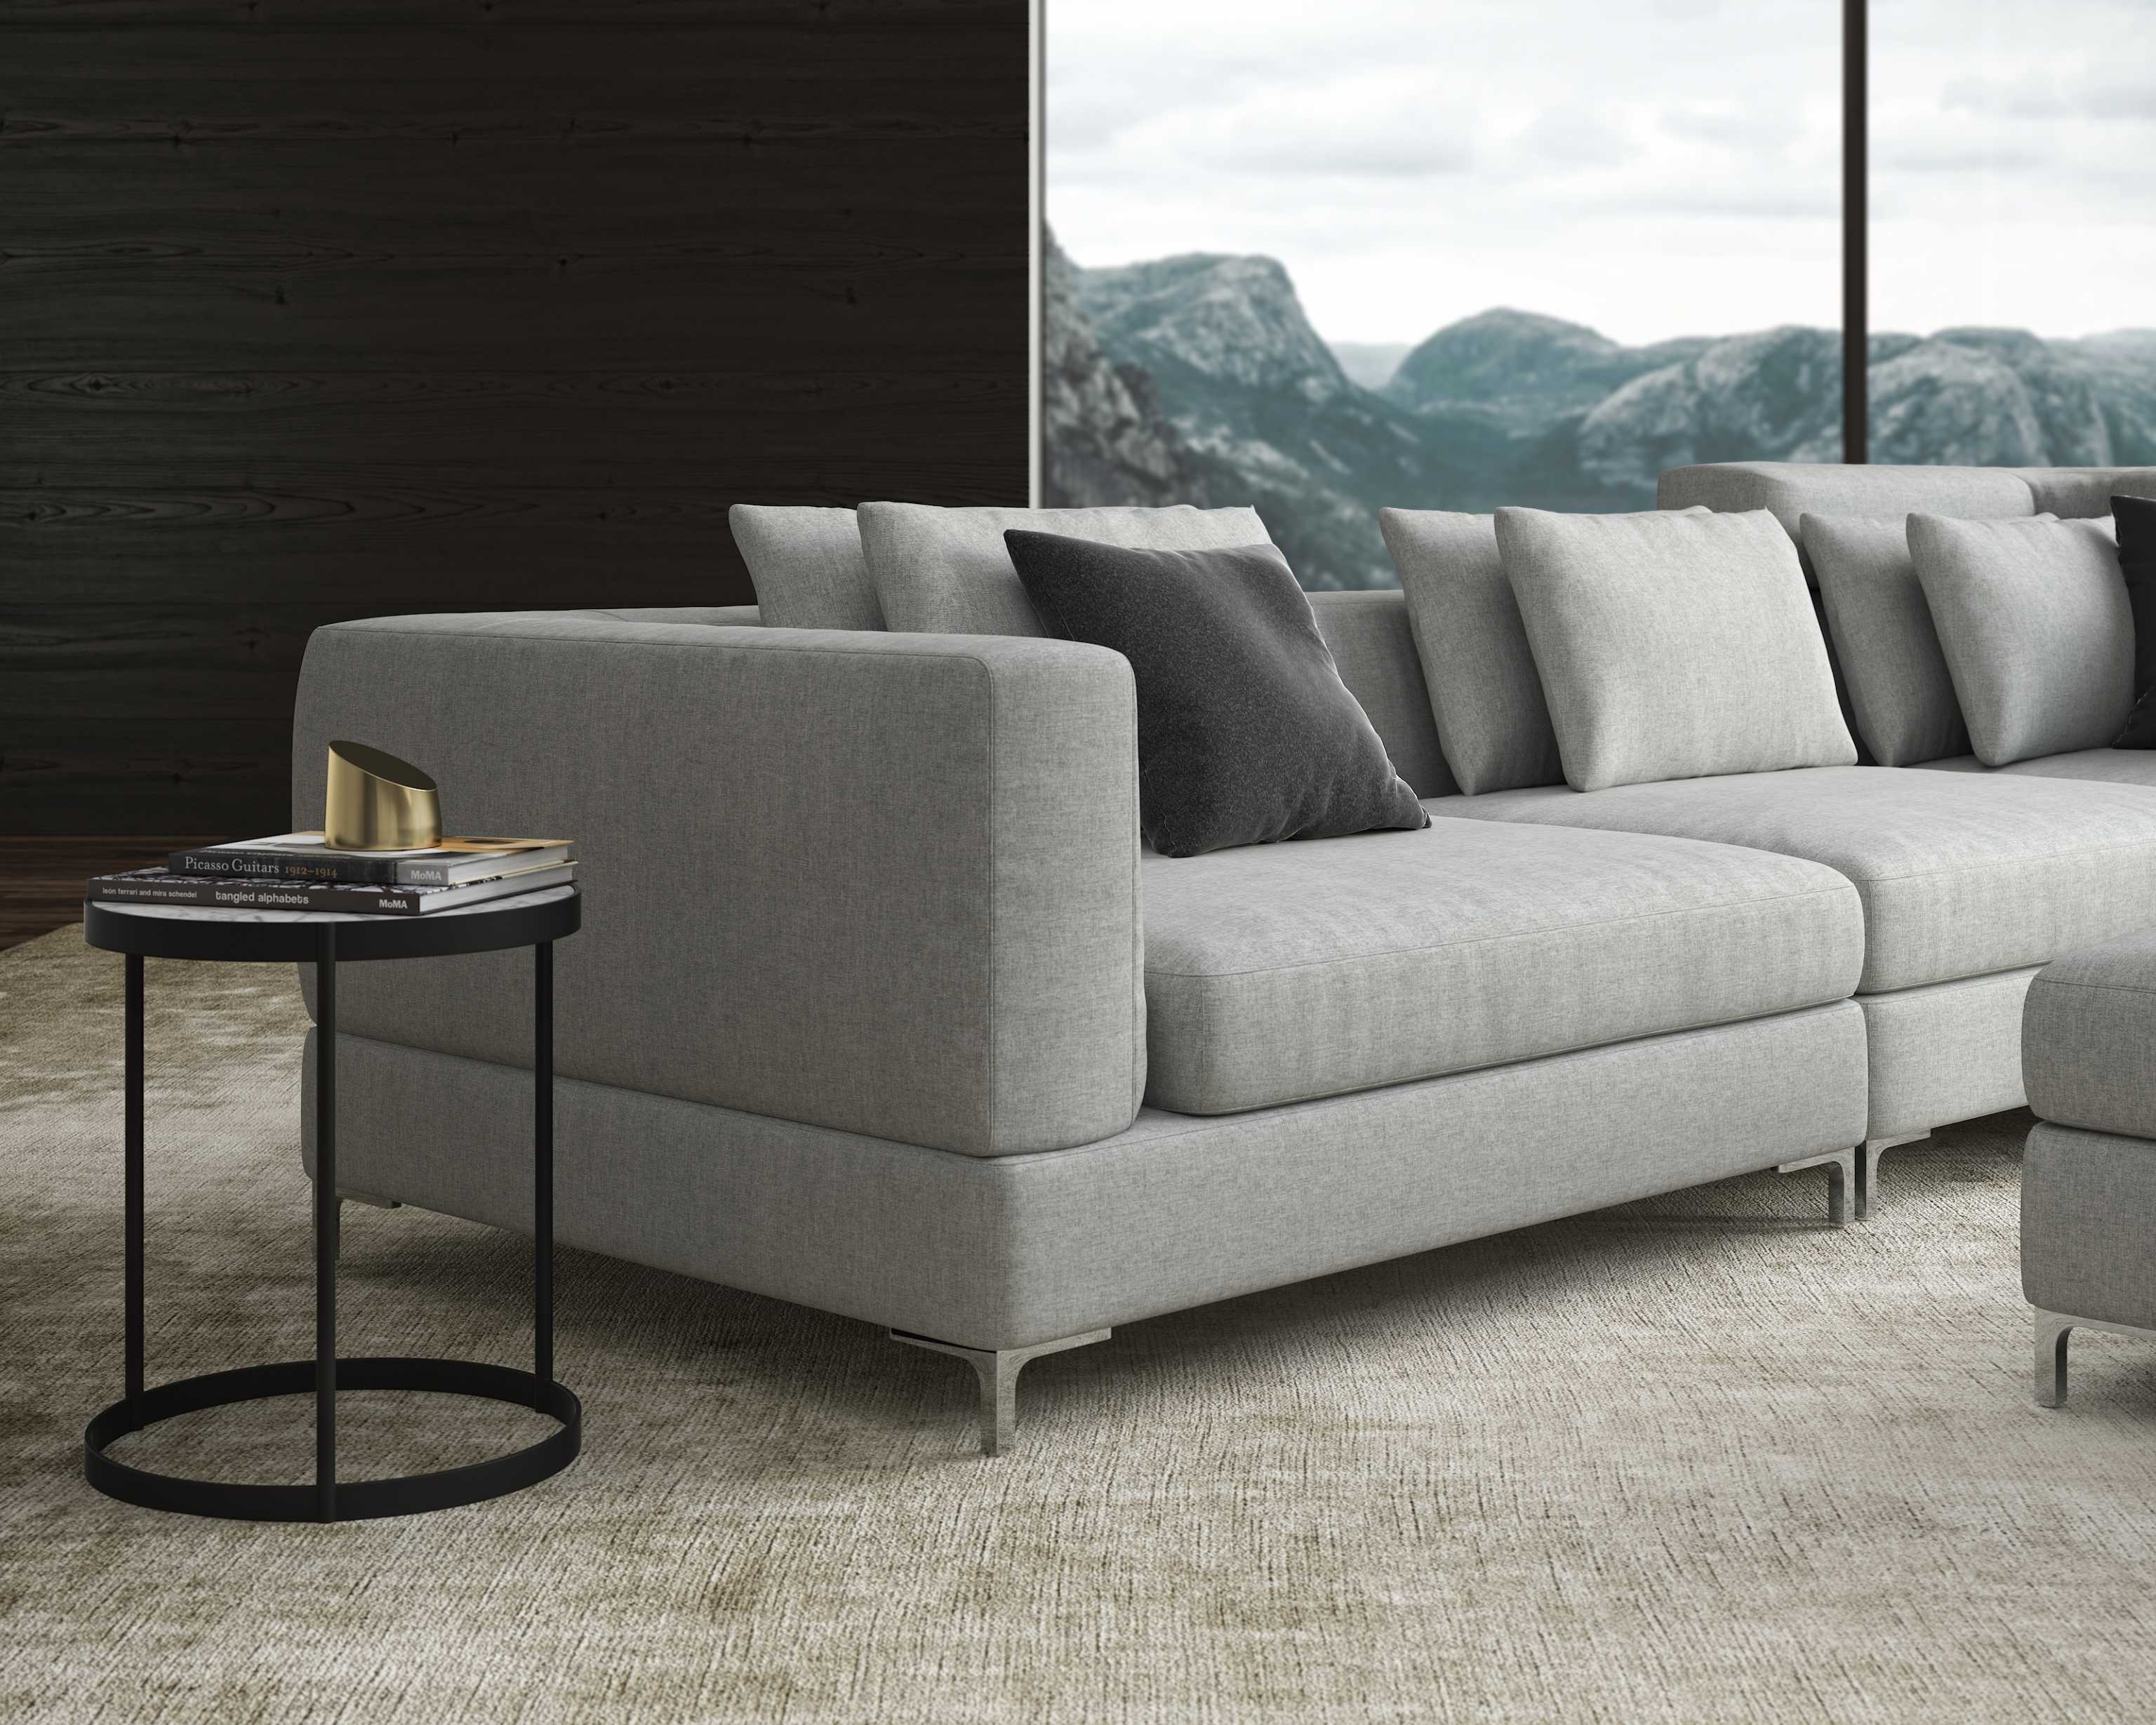 Rove Concepts Sectional Couch Celeb Central